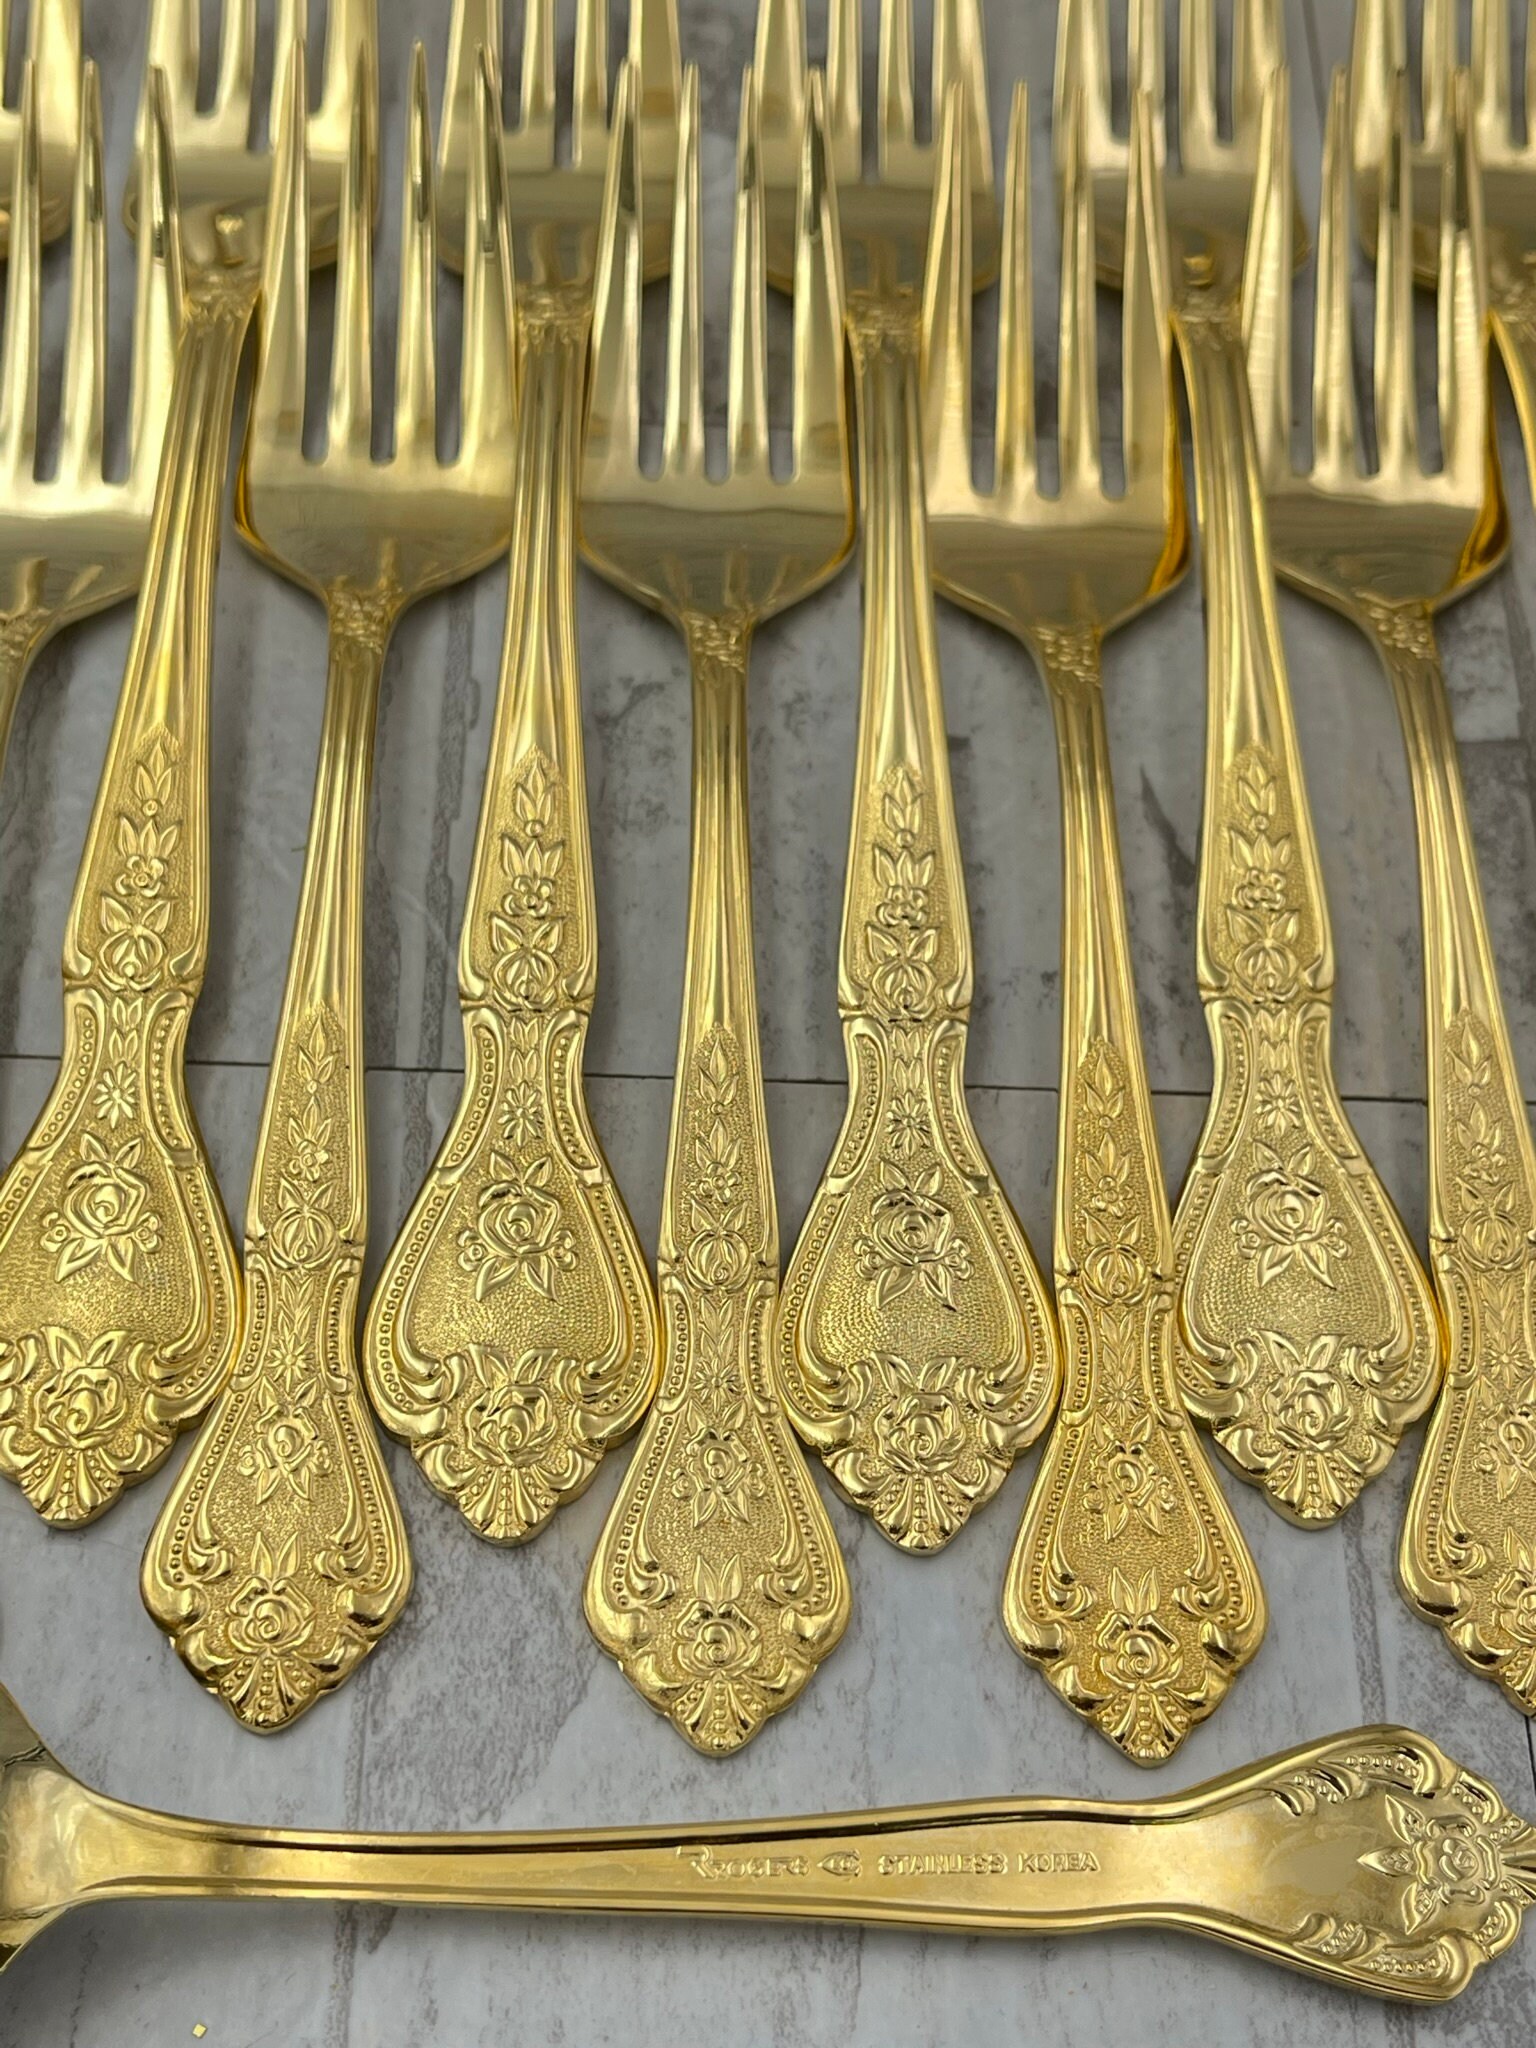 Vintage Gold Flatware set with silverware chest, service for 12